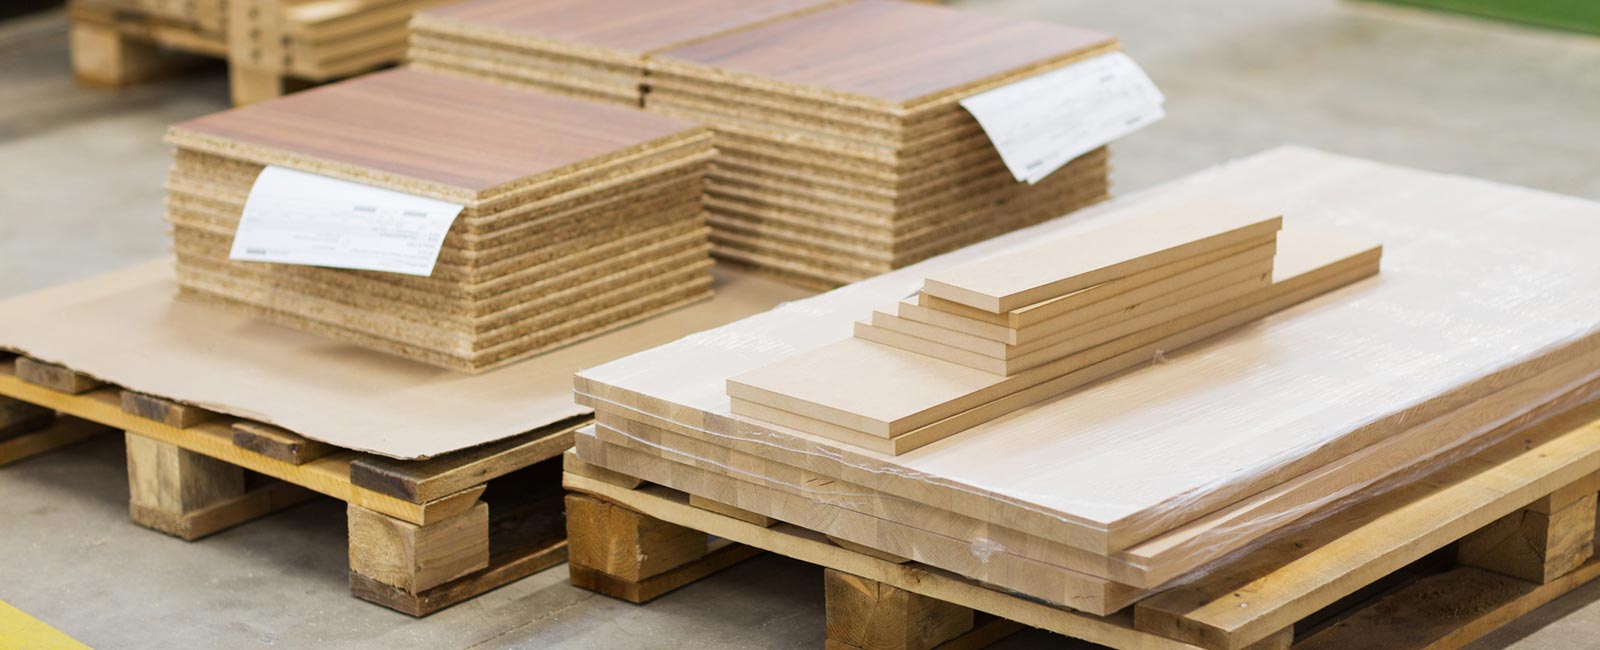 MDF Plywood Cut to Size, Lumber